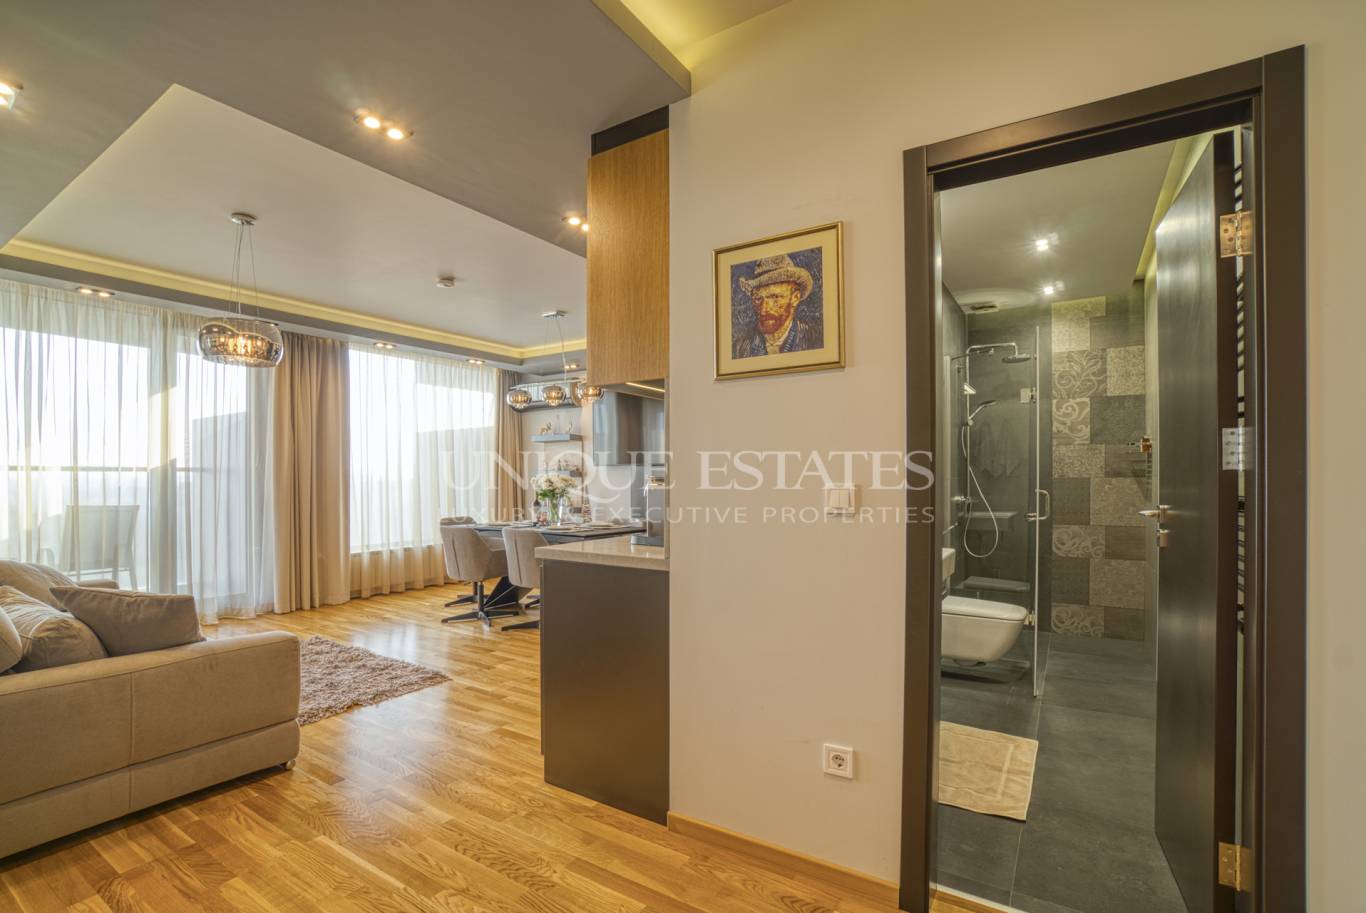 Apartment for sale in Sofia, Bulgaria Blvd with listing ID: E12623 - image 4